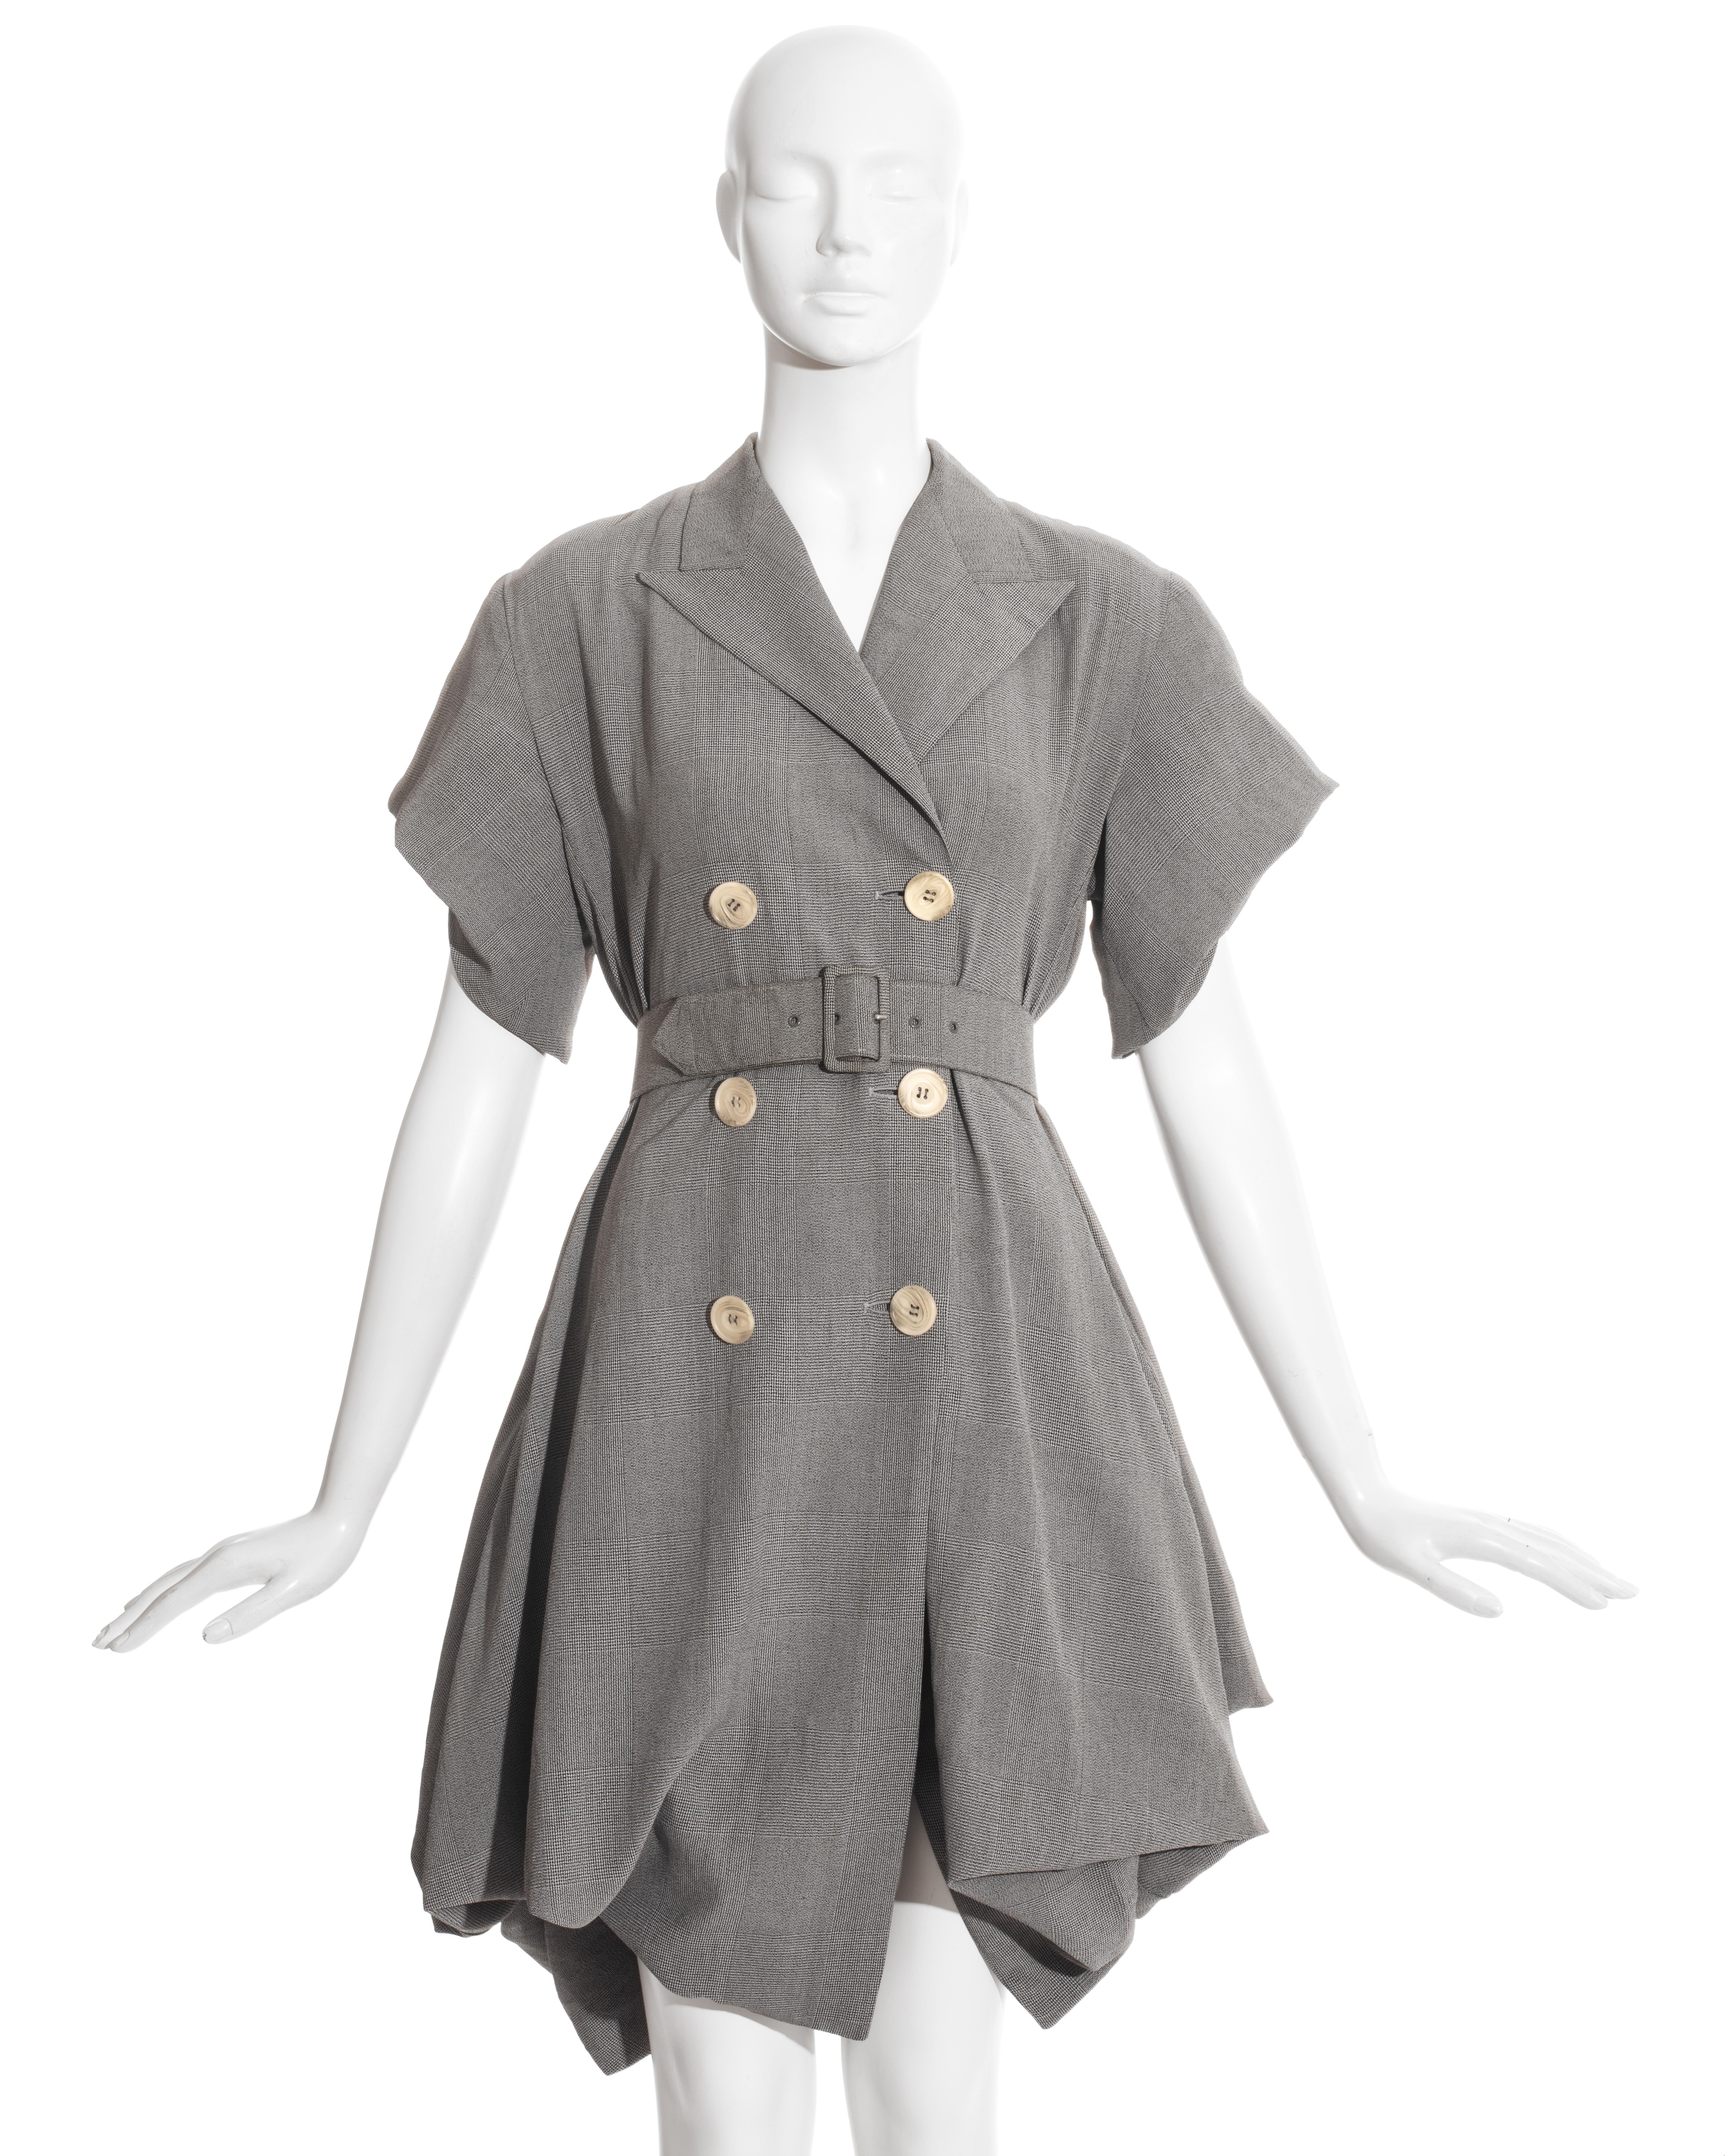 John Galliano London; grey rayon Prince of Wales check coat dress. Bustled skirt falling in polonaise drapes, gathering into a band at the hem - can be buttoned up to be made shorter.   

Blanche Dubois, Spring-Summer 1988